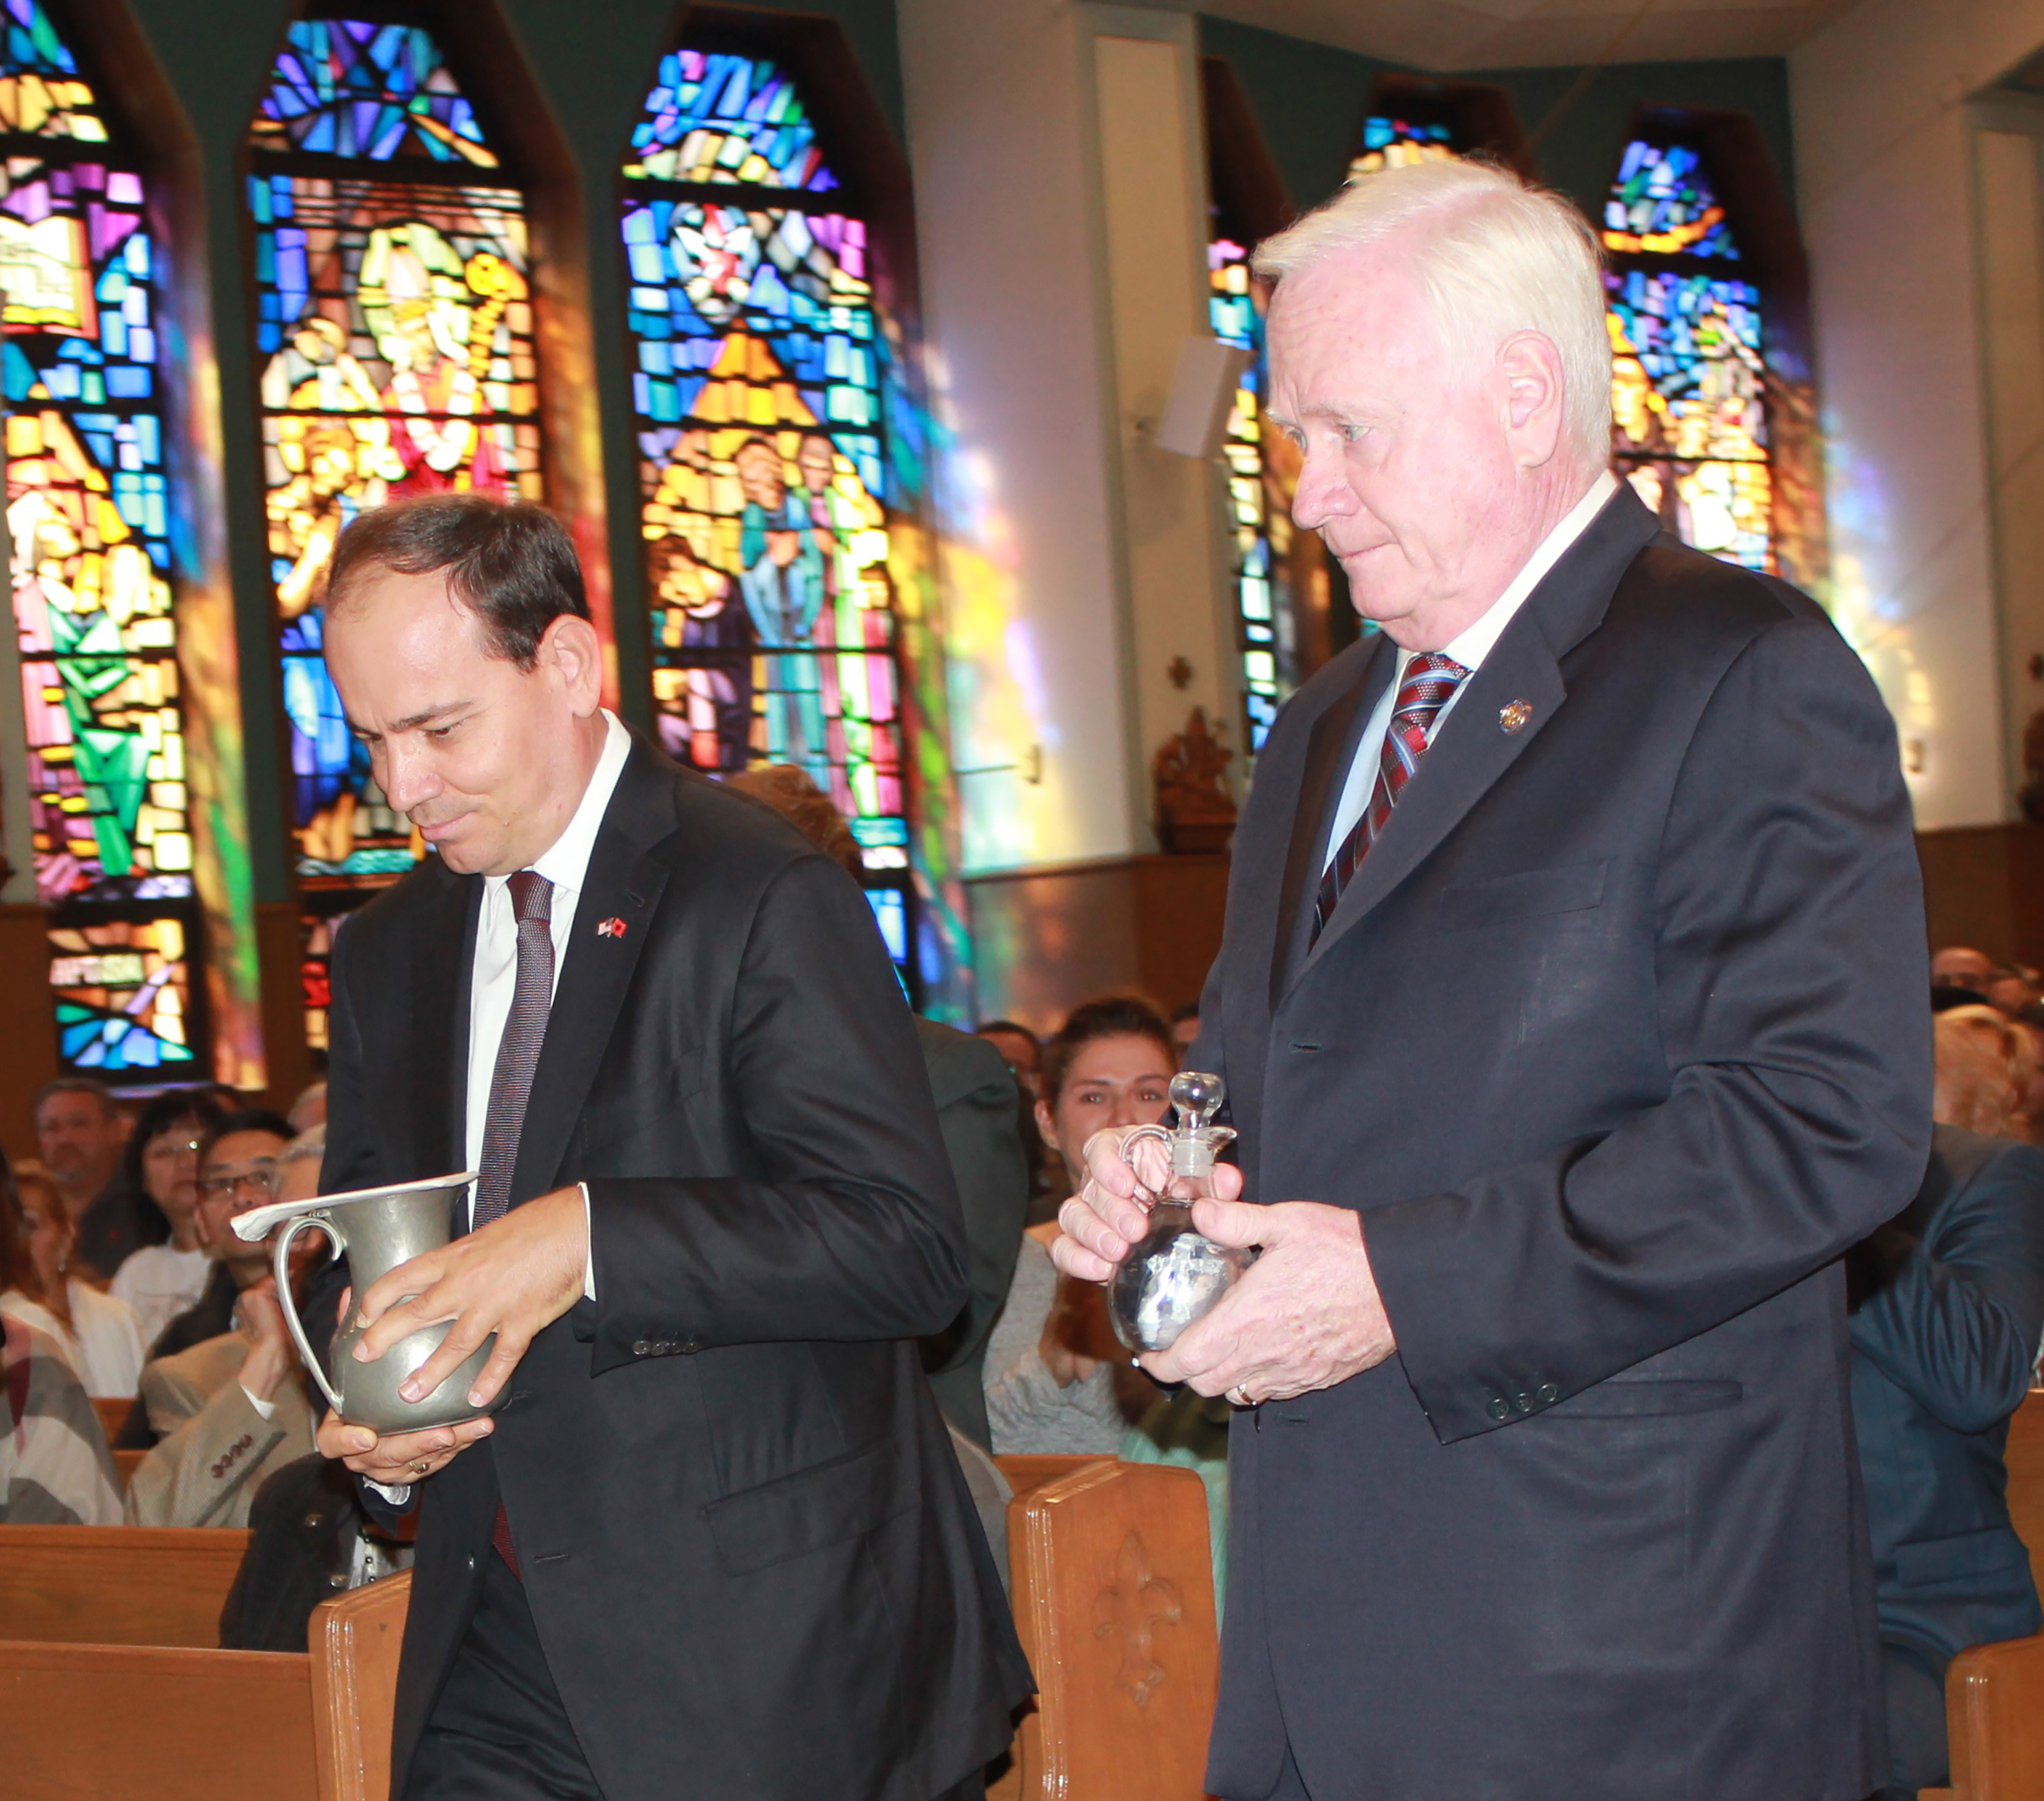 Albanian President Bujar Nishani and state Sen. Martin Golden of Brooklyn, N.Y., carry up the offertory gifts during Mass Sept. 25 at St. Athanasius Church in Brooklyn. President Nishani later joined local Albanian-Americans, clergy and elected officials in unveiling a statue of St. Teresa of Kolkata, a gift to Brooklyn from the Albanian community. (CNS photo/Marie Elena Giossi, The Tablet)